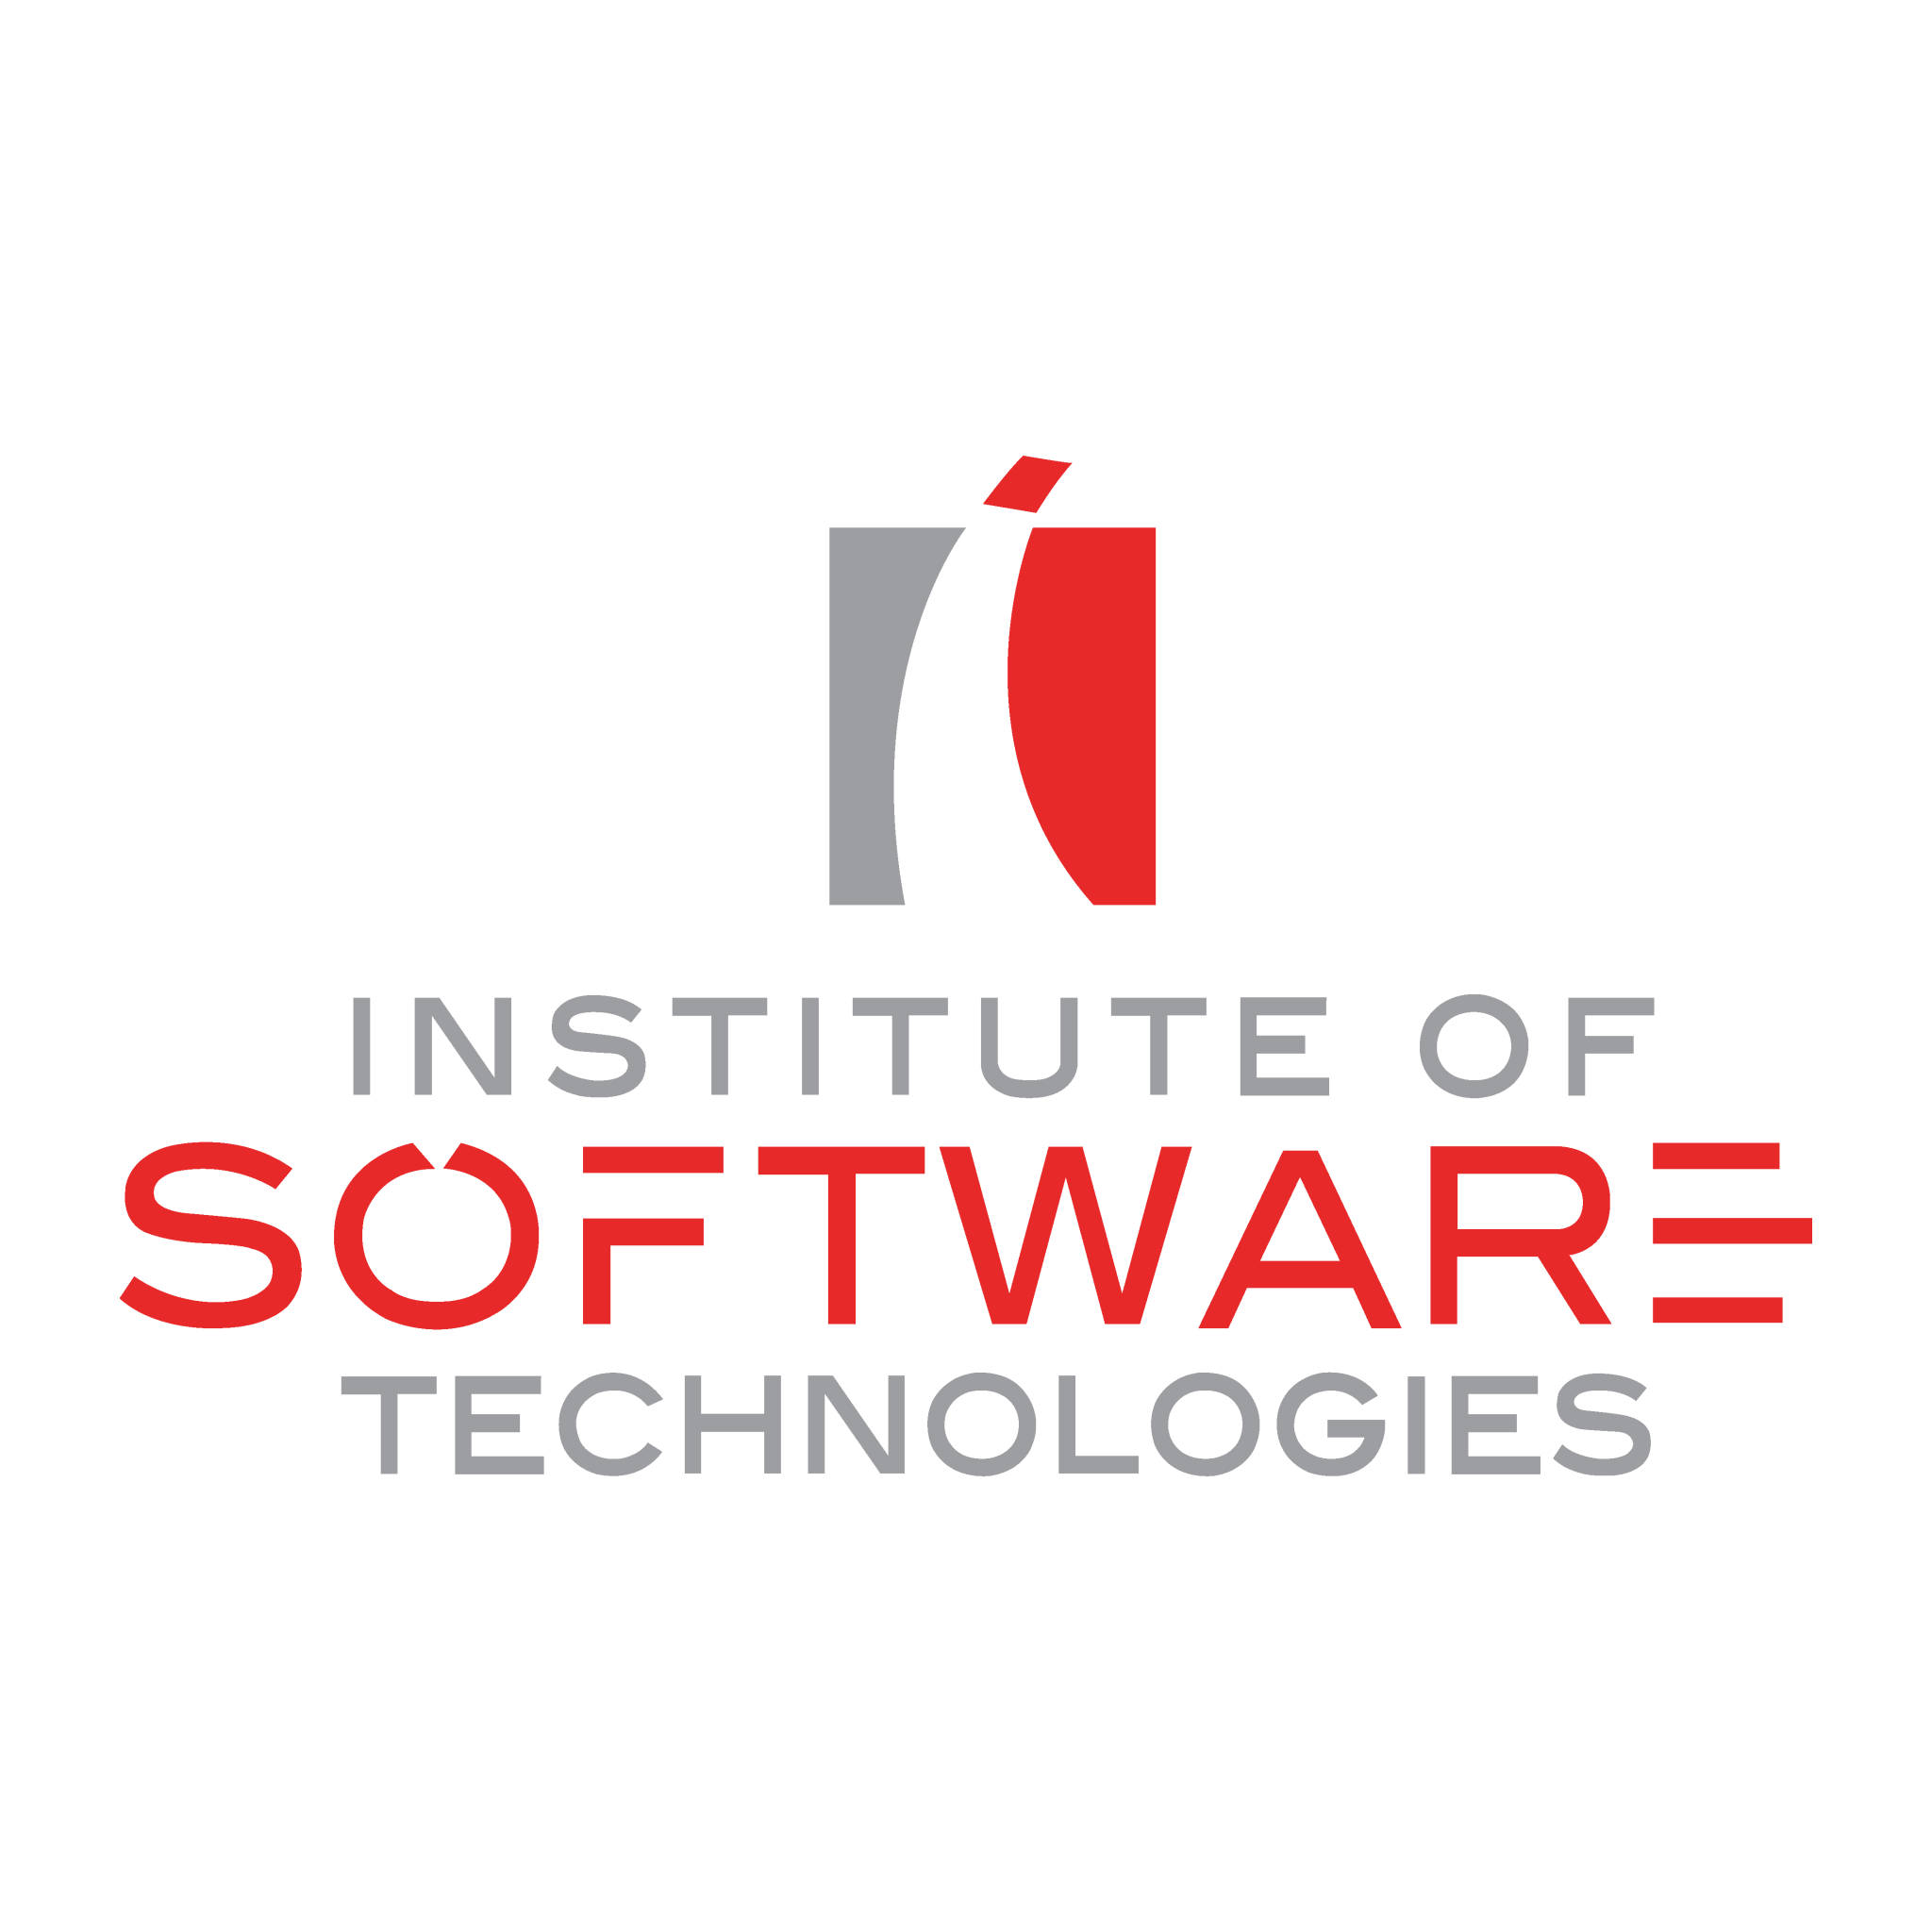 Institute of Software Technologies